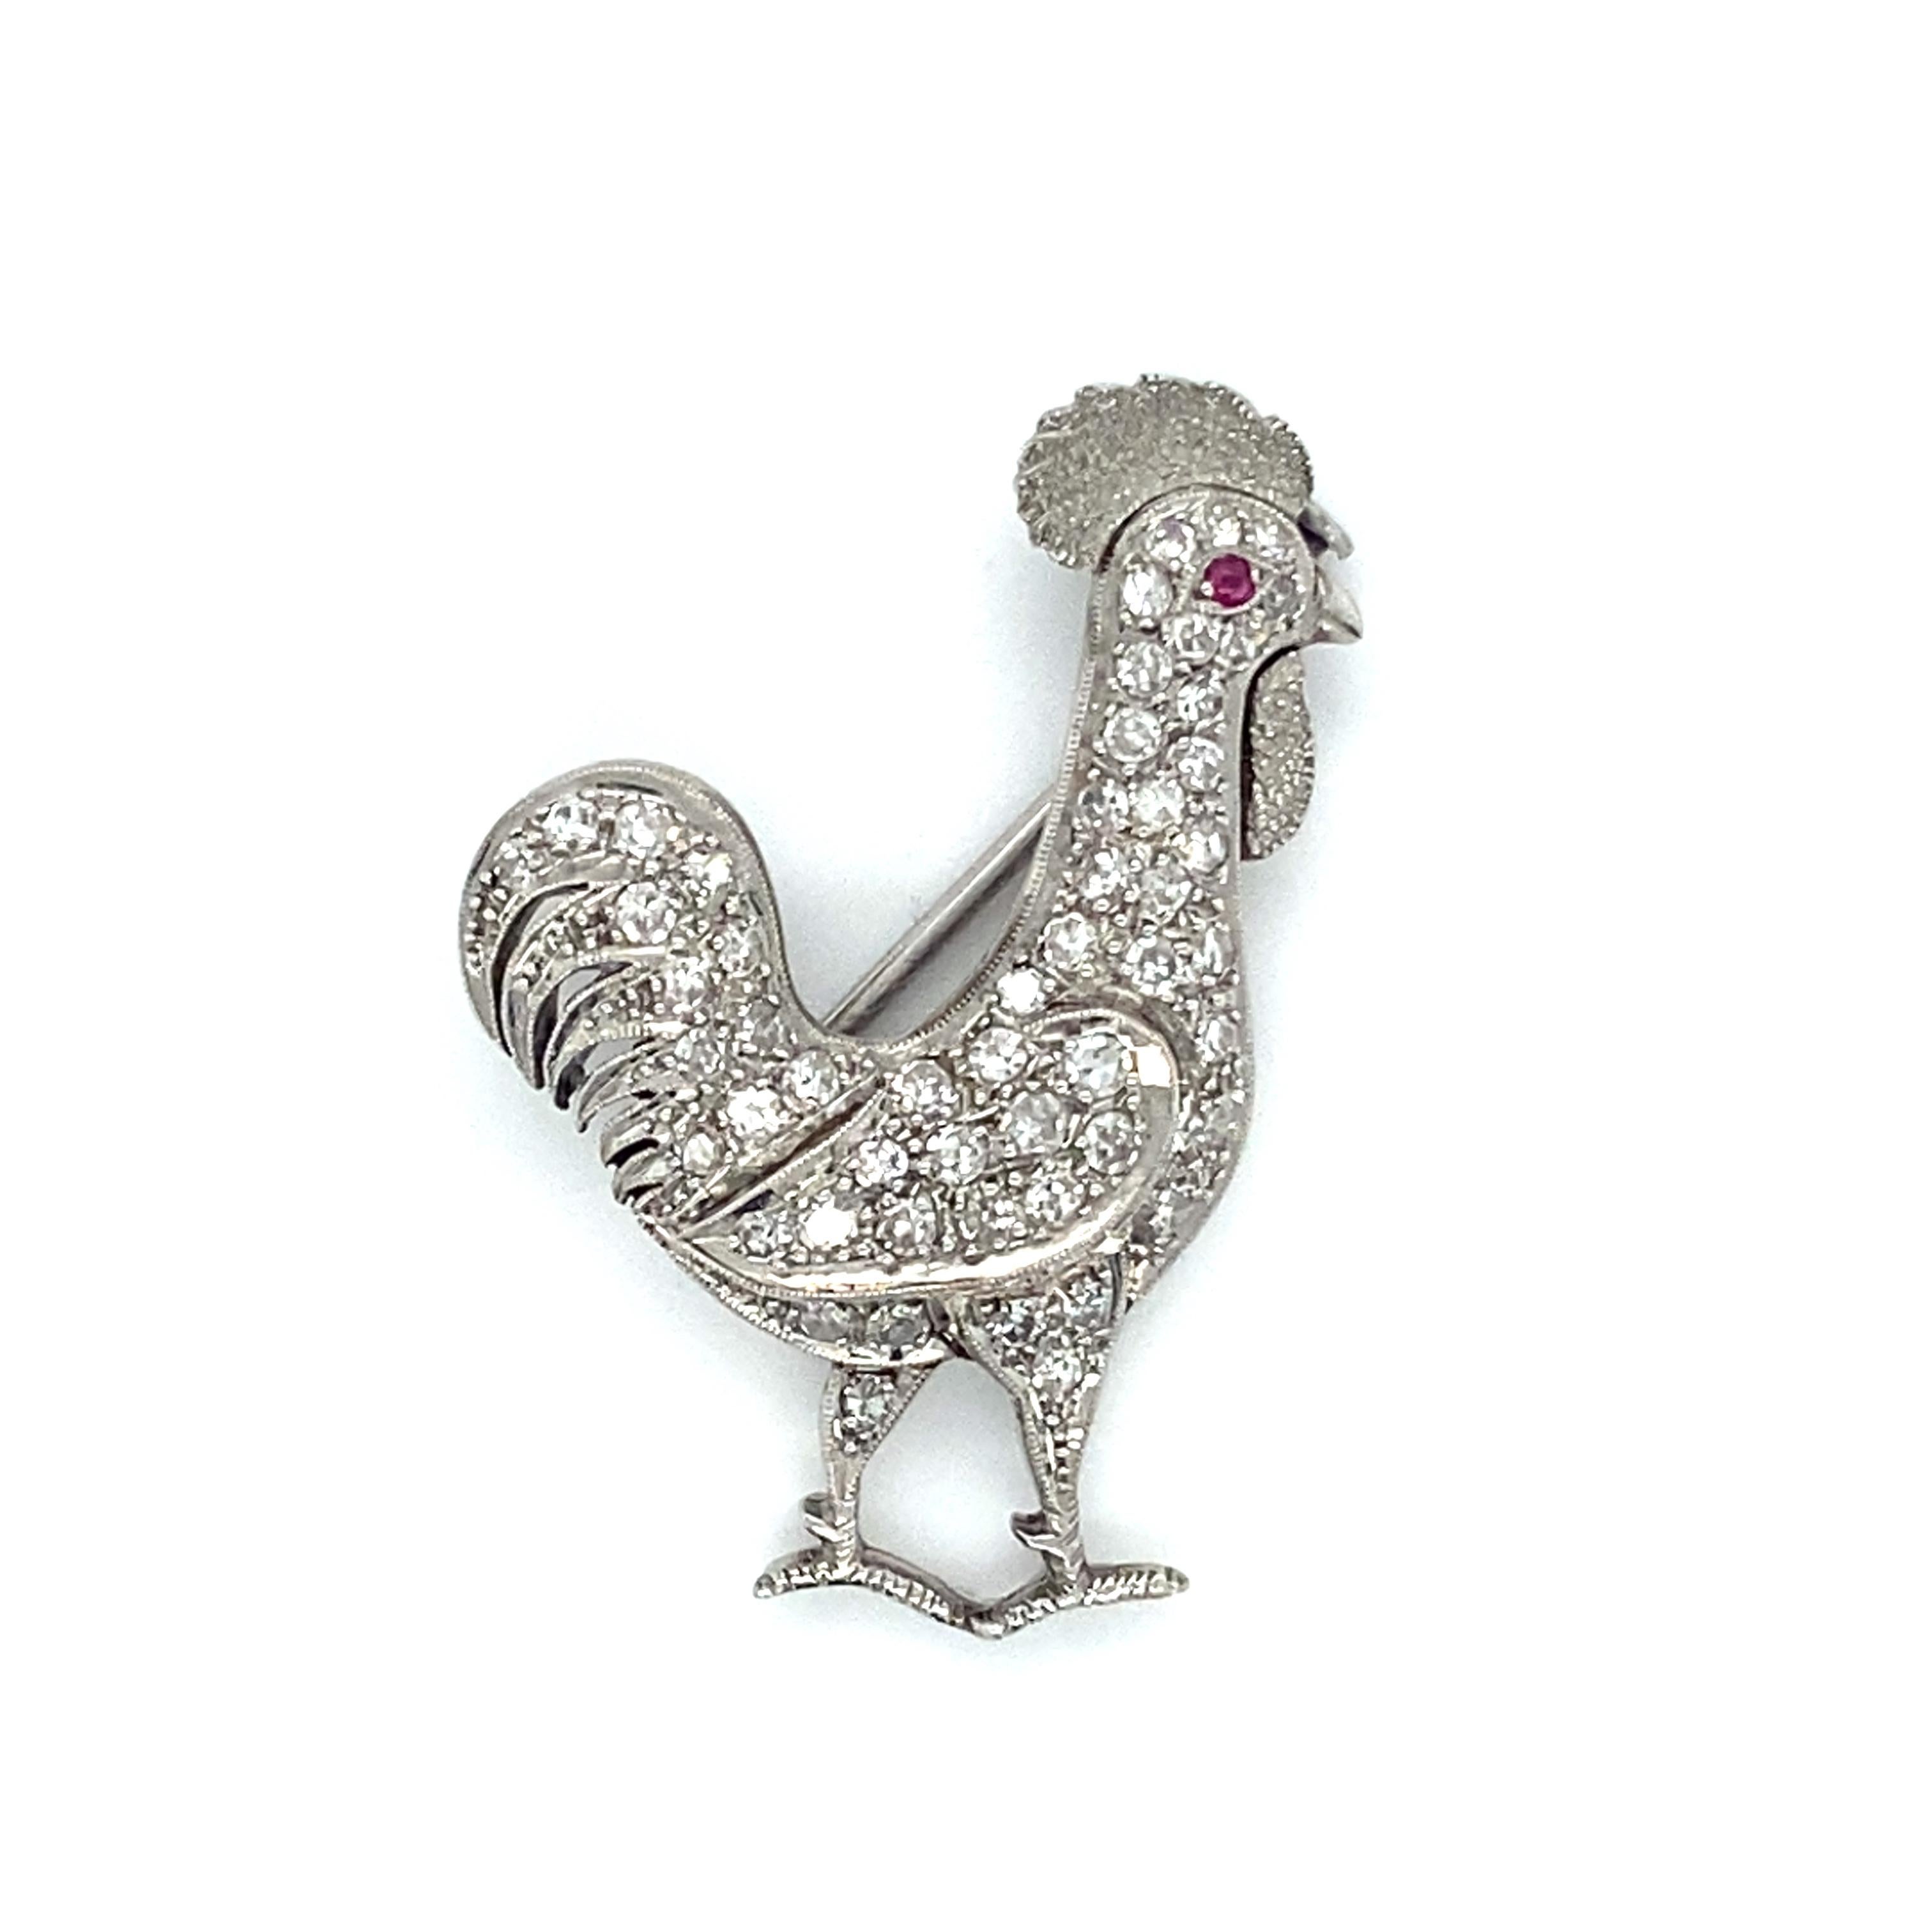 Item Details: 
Metal Type: Platinum
Weight: 6.3 Grams
Measurements: 1.4 inch length x 1 inch width 

Diamond Details:
Carat: 1 Carat Total Weight
Cut: Single Cut Diamonds
Color: G
Clarity: VS

Features: 
Accent Ruby gemstone (eye of rooster)
Made in